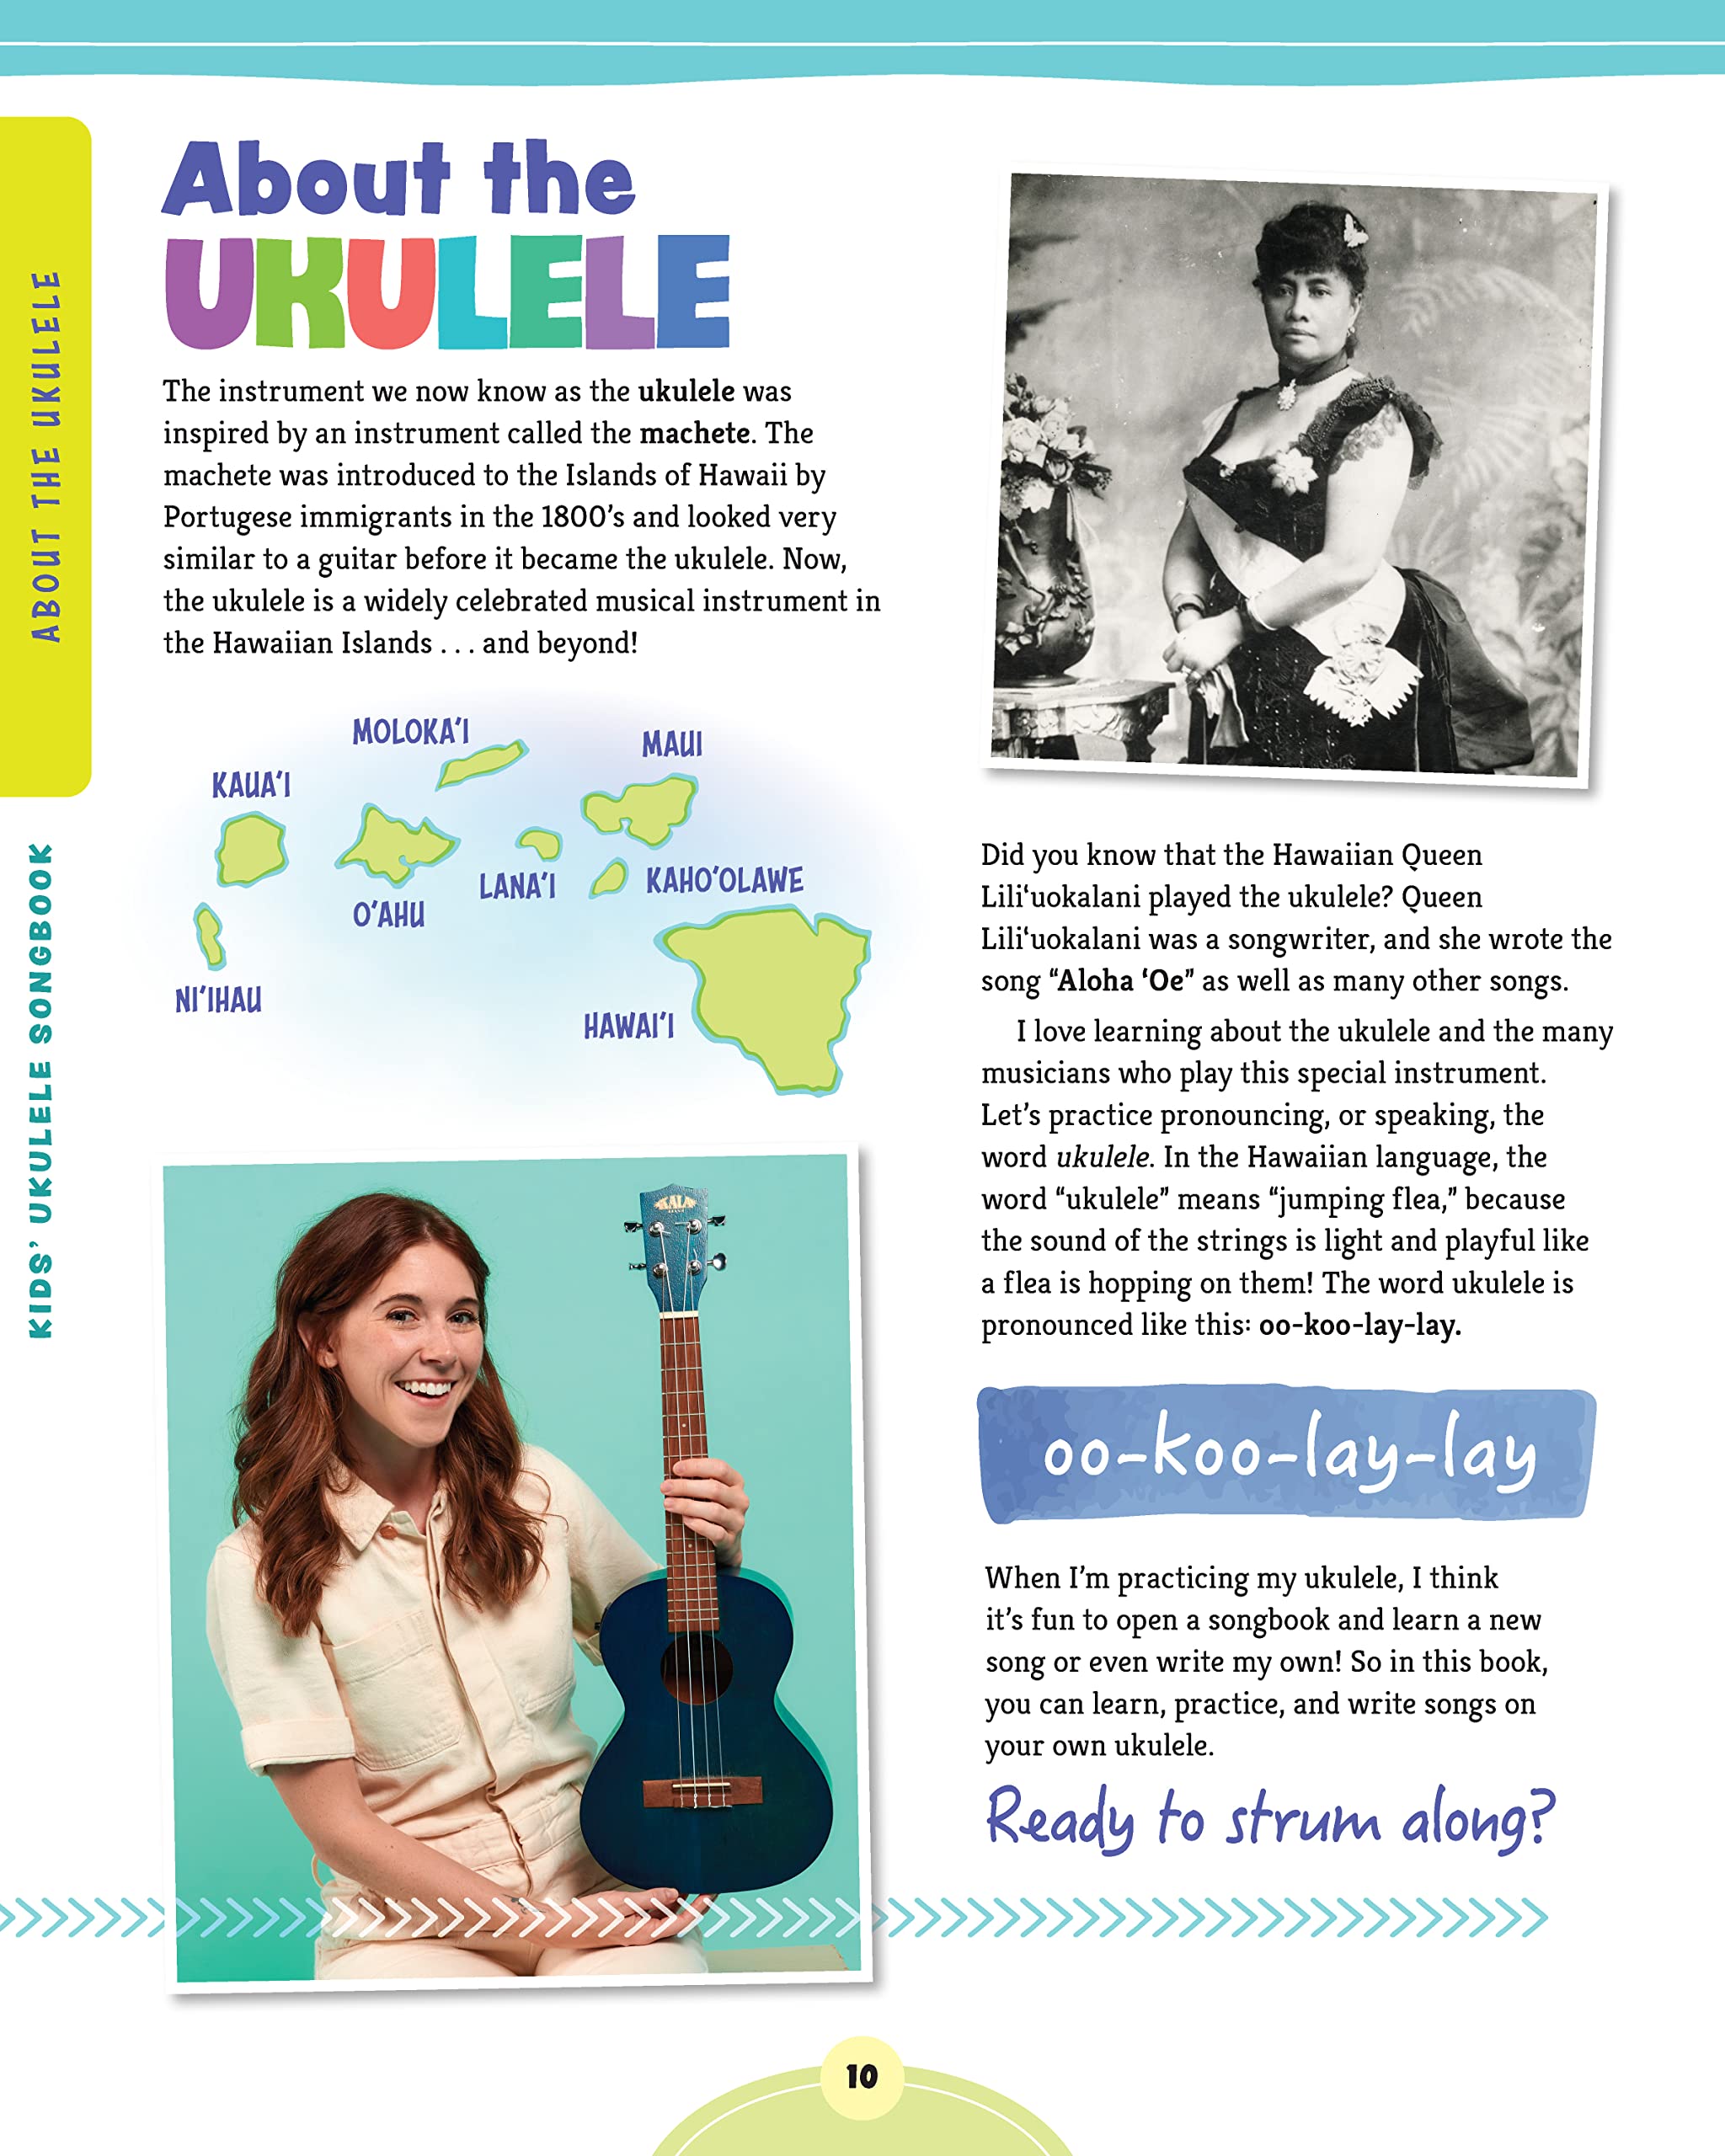 Kids' Ukulele Songbook: Learn 30 Songs to Sing and Play (Happy Fox Books) The Next Step for Kids with Basic Uke Skills, with Easy Instructions for New Chords and Notes, Pull-Out Chord Cards, and More